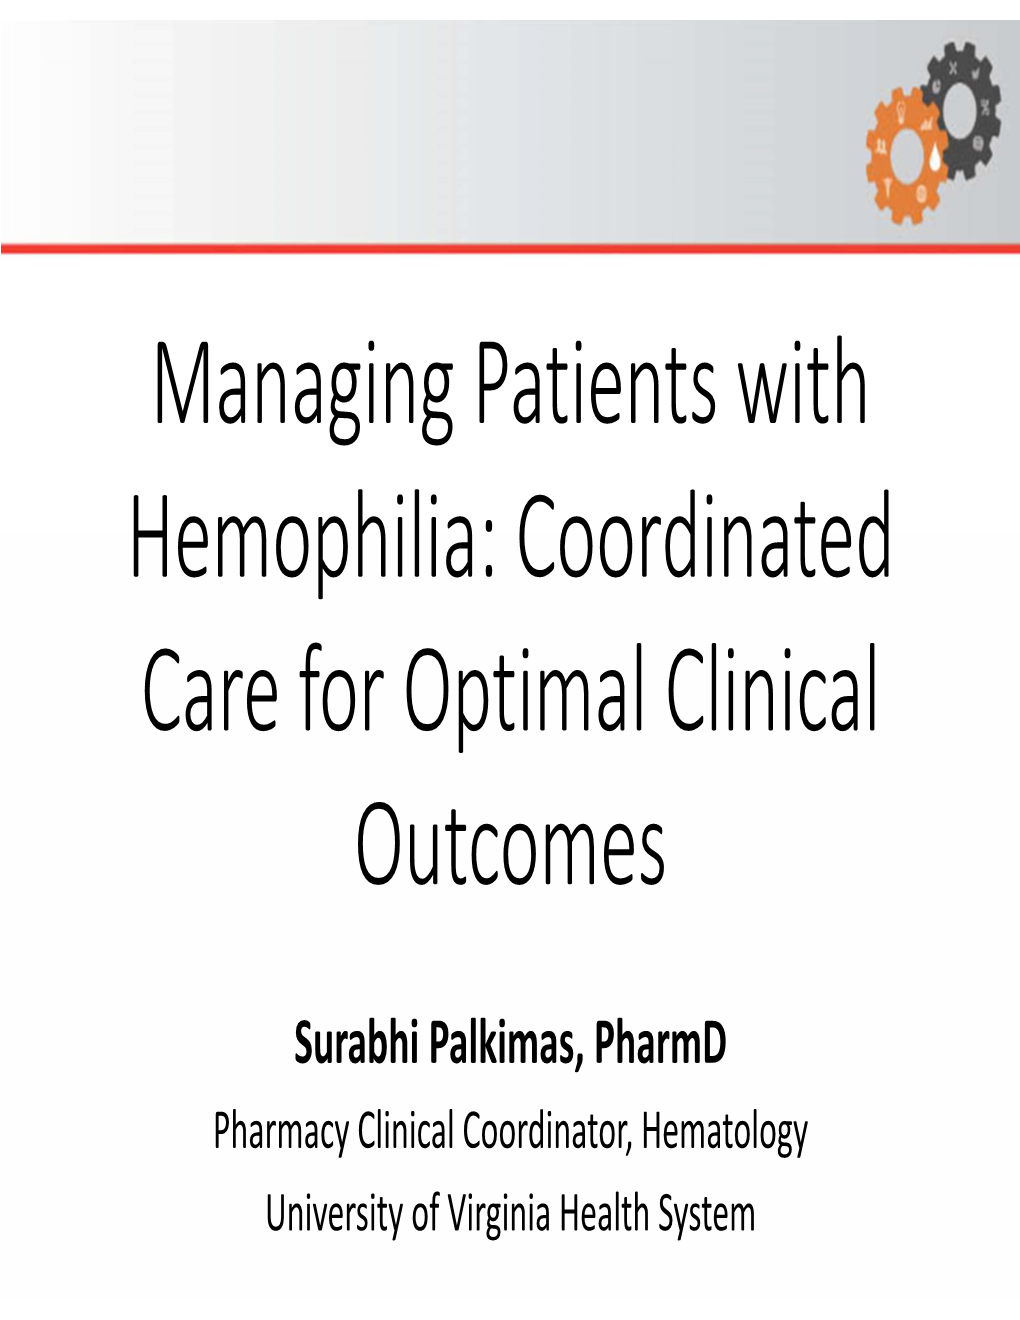 Managing Patients with Hemophilia: Coordinated Care for Optimal Clinical Outcomes